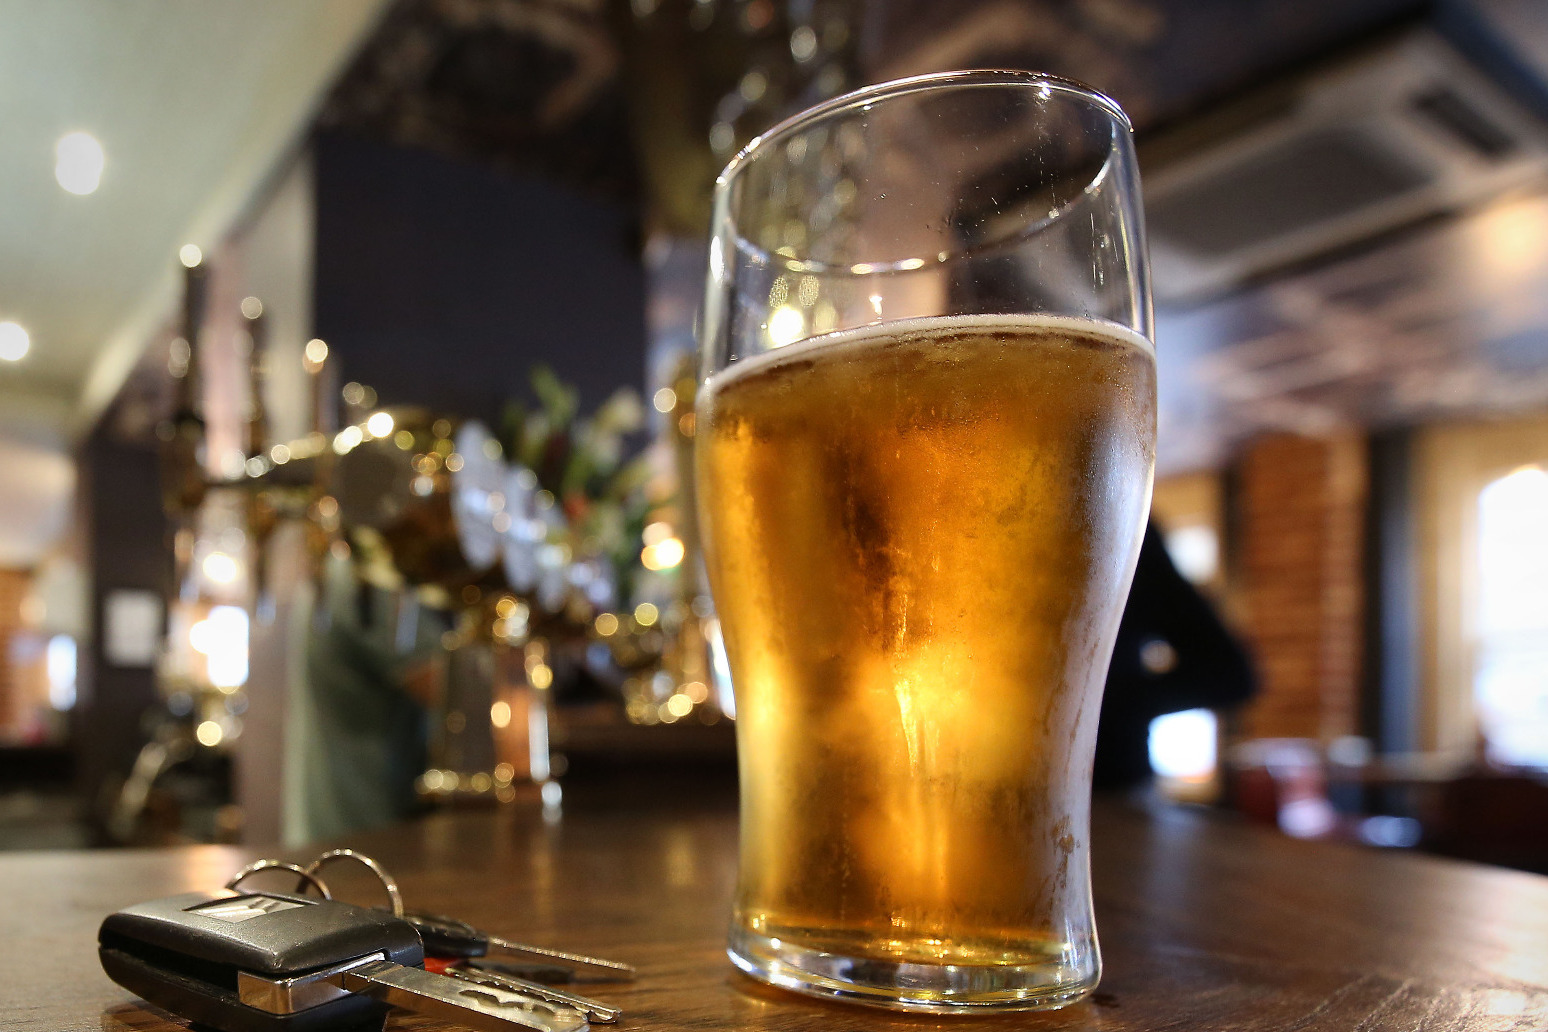 Pub beer sales down 38% from pre-pandemic levels 